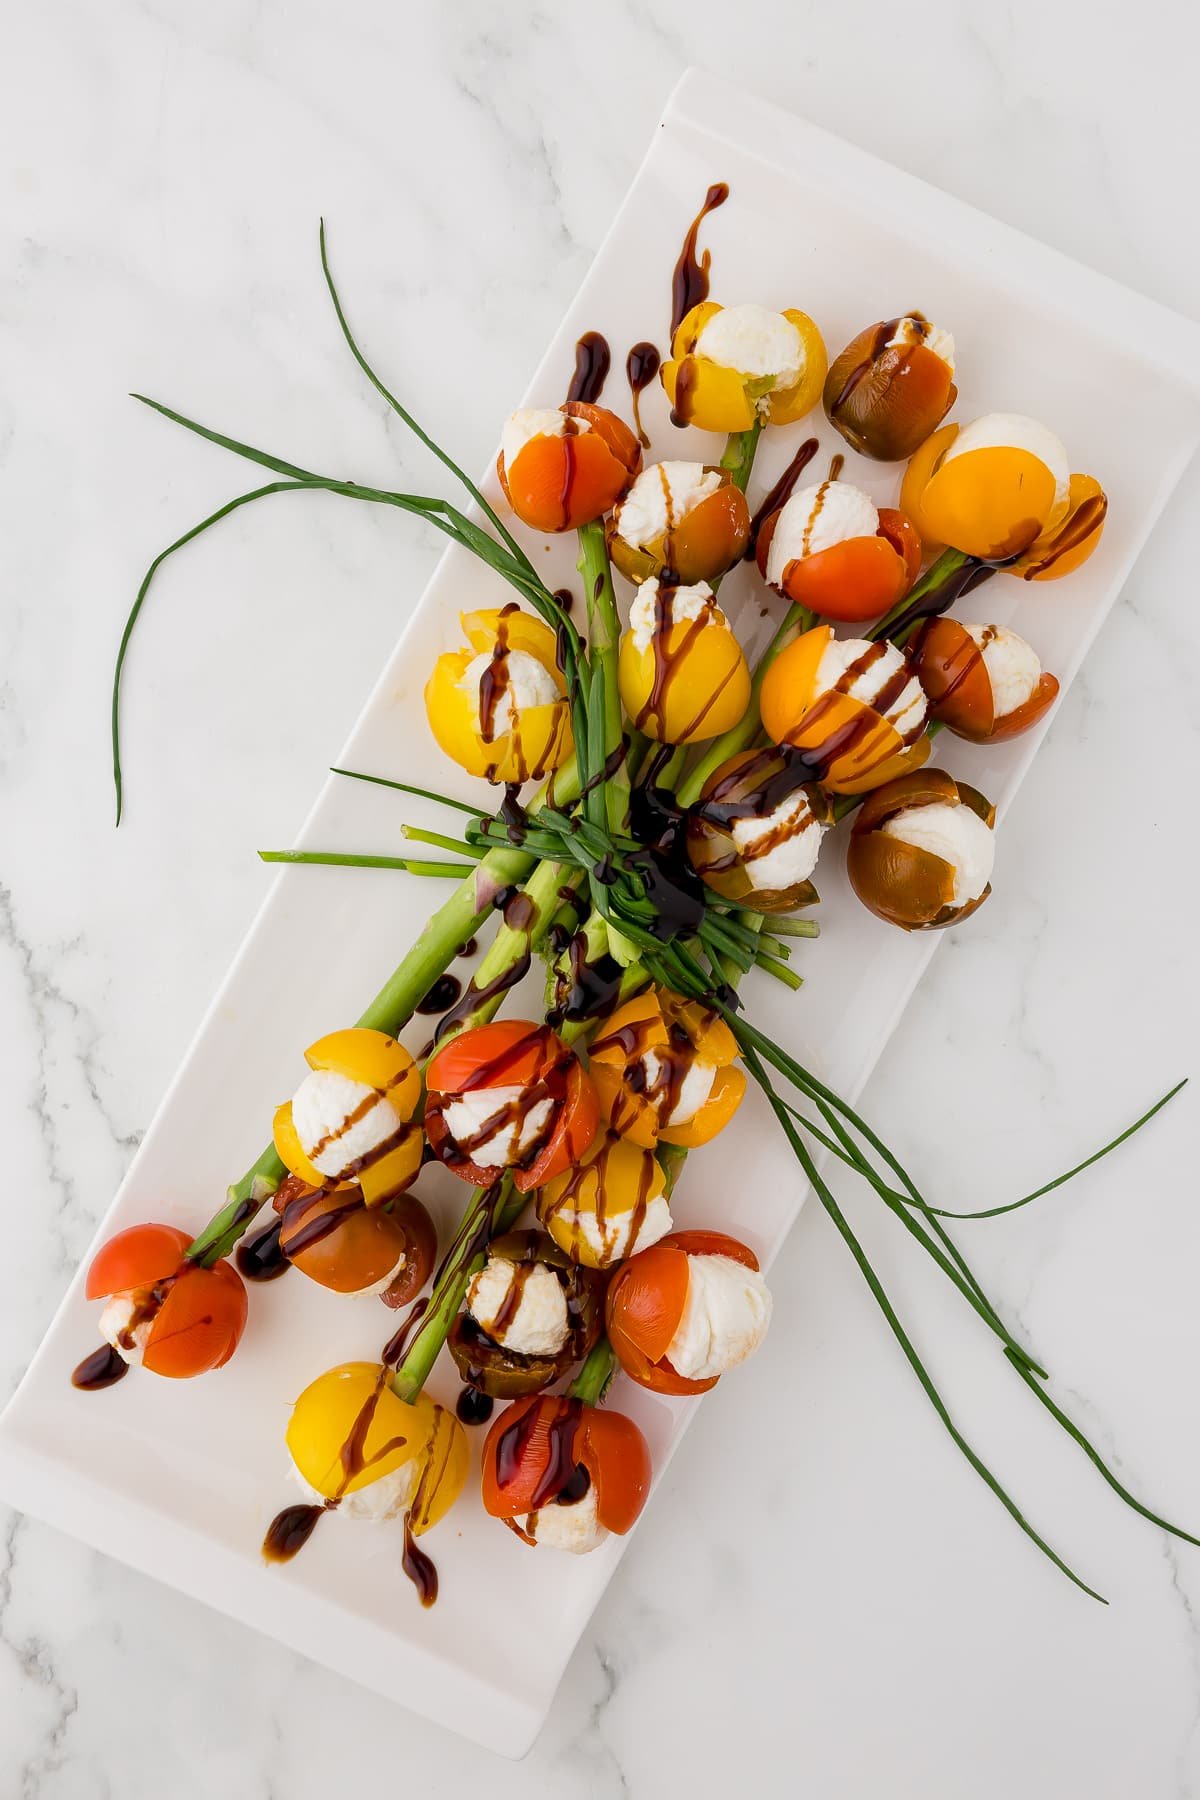 bundle of tomatoes that look like tulips with balsamic drizzle